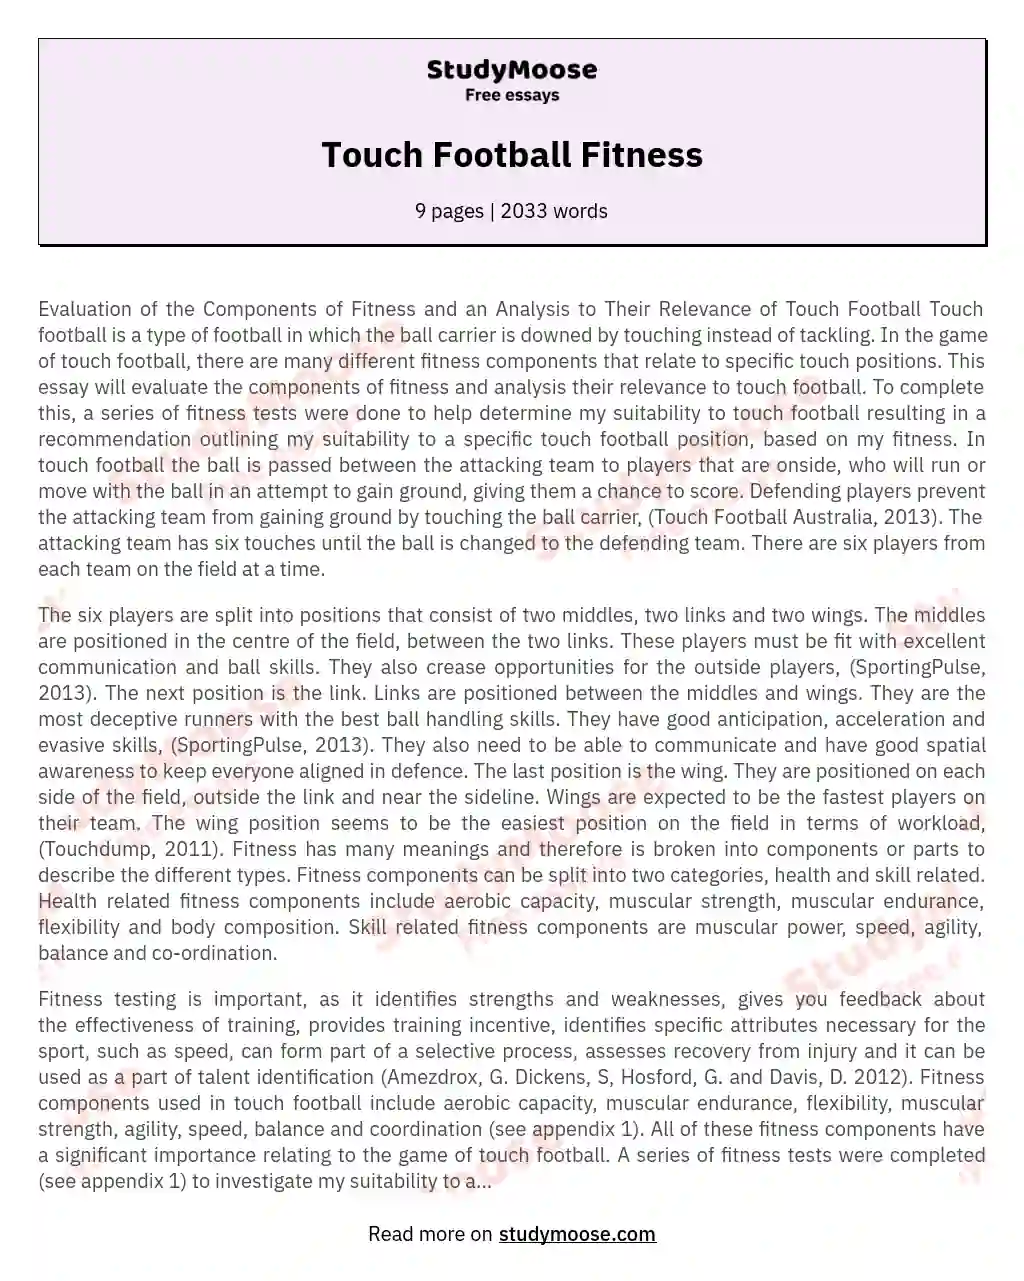 Touch Football Fitness essay